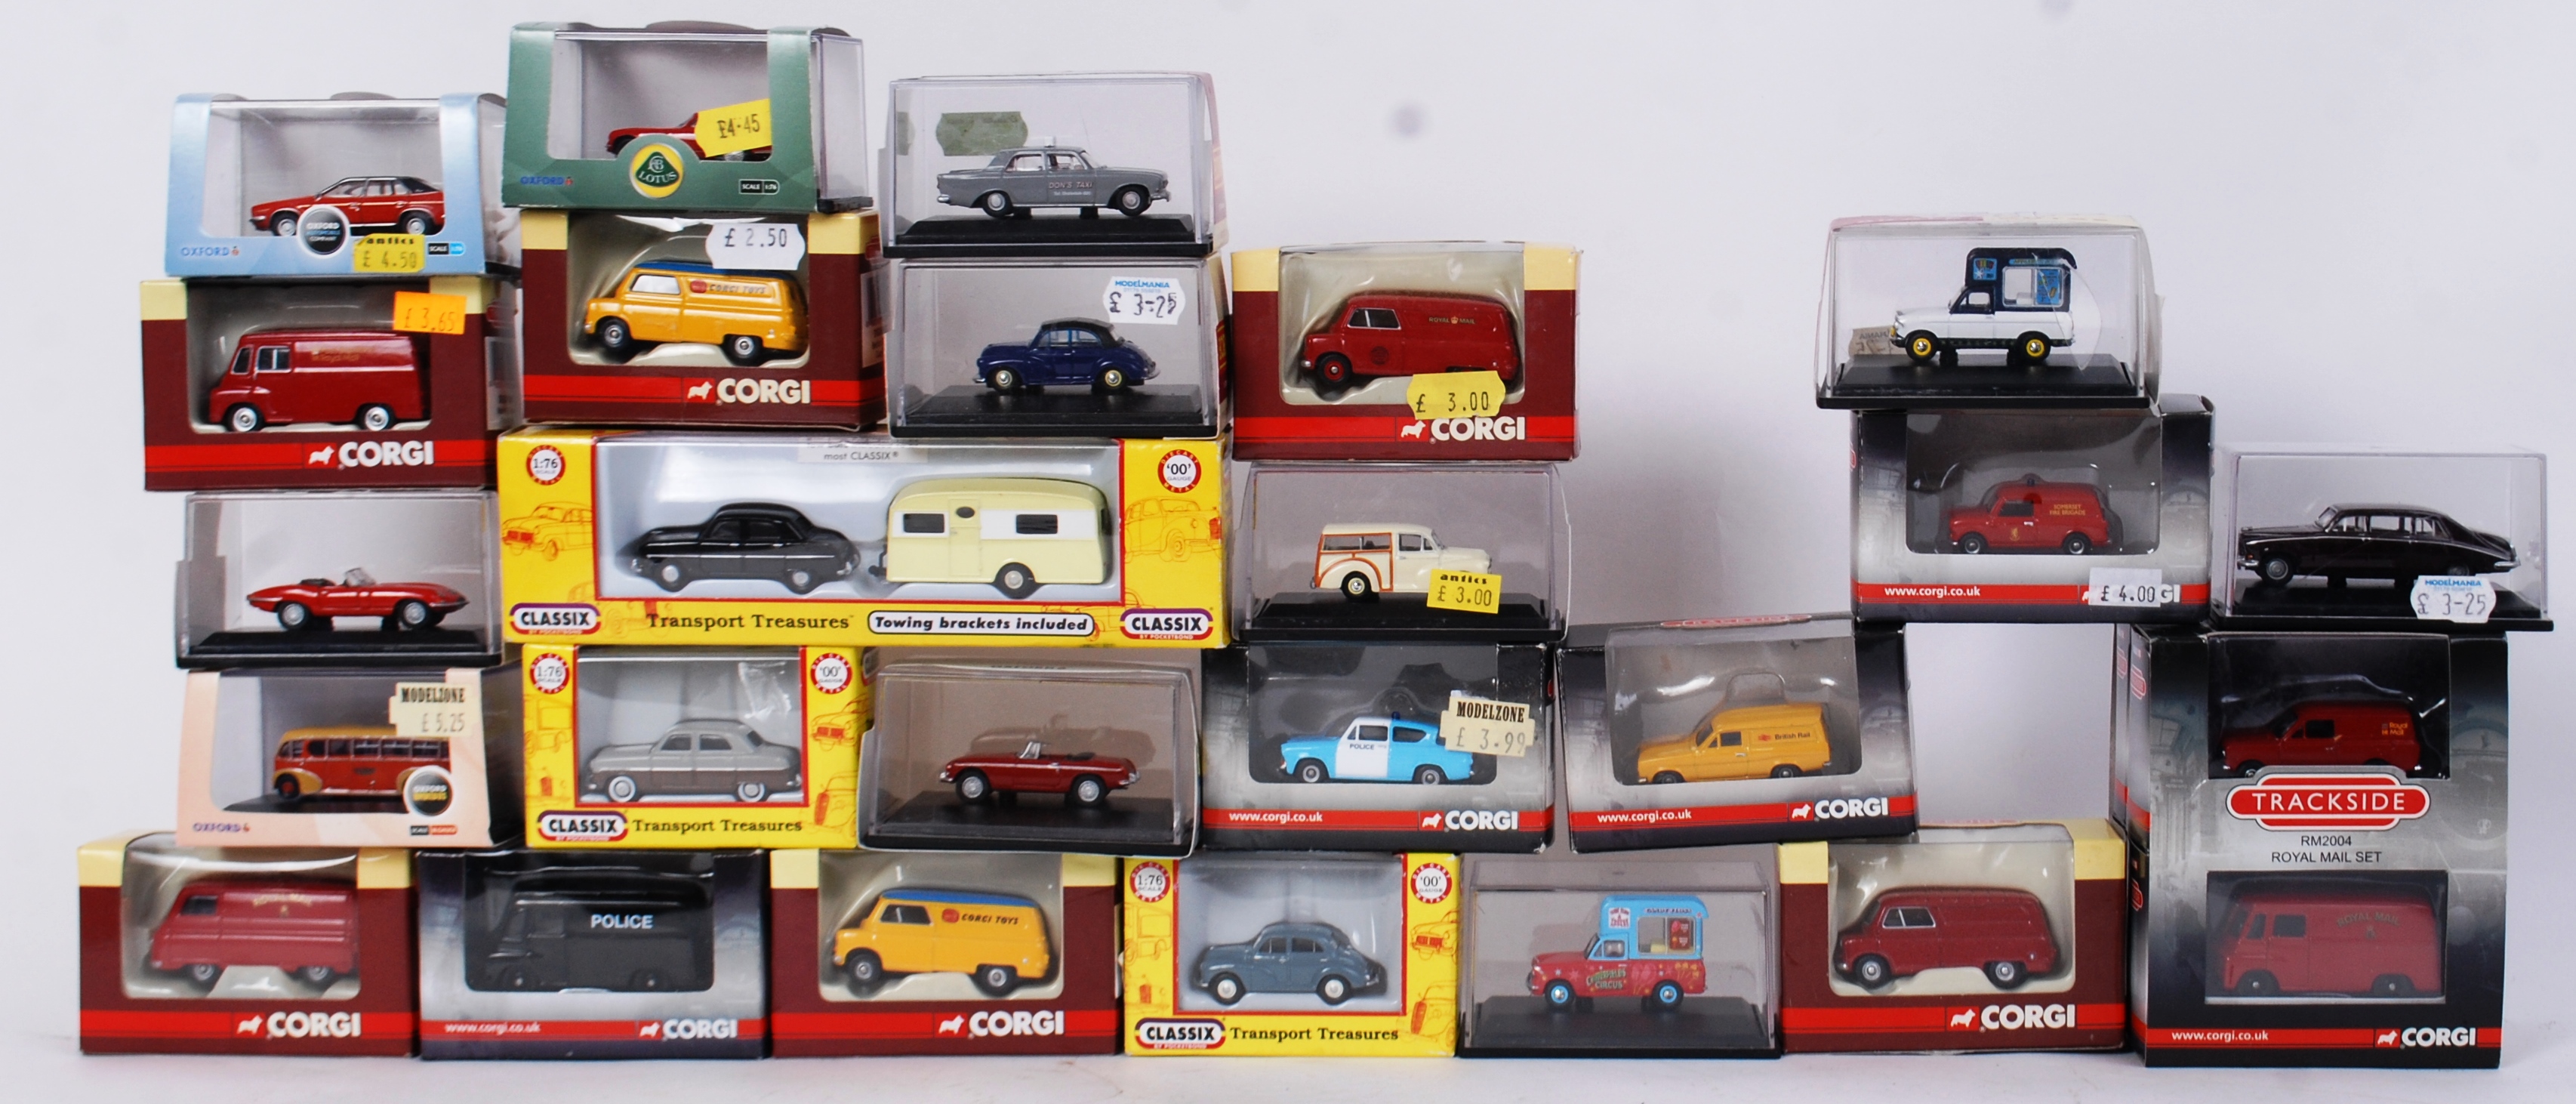 1:76 SCALE: A collection of approx 30x 1:76 scale diecast model cars. All within the original boxes.